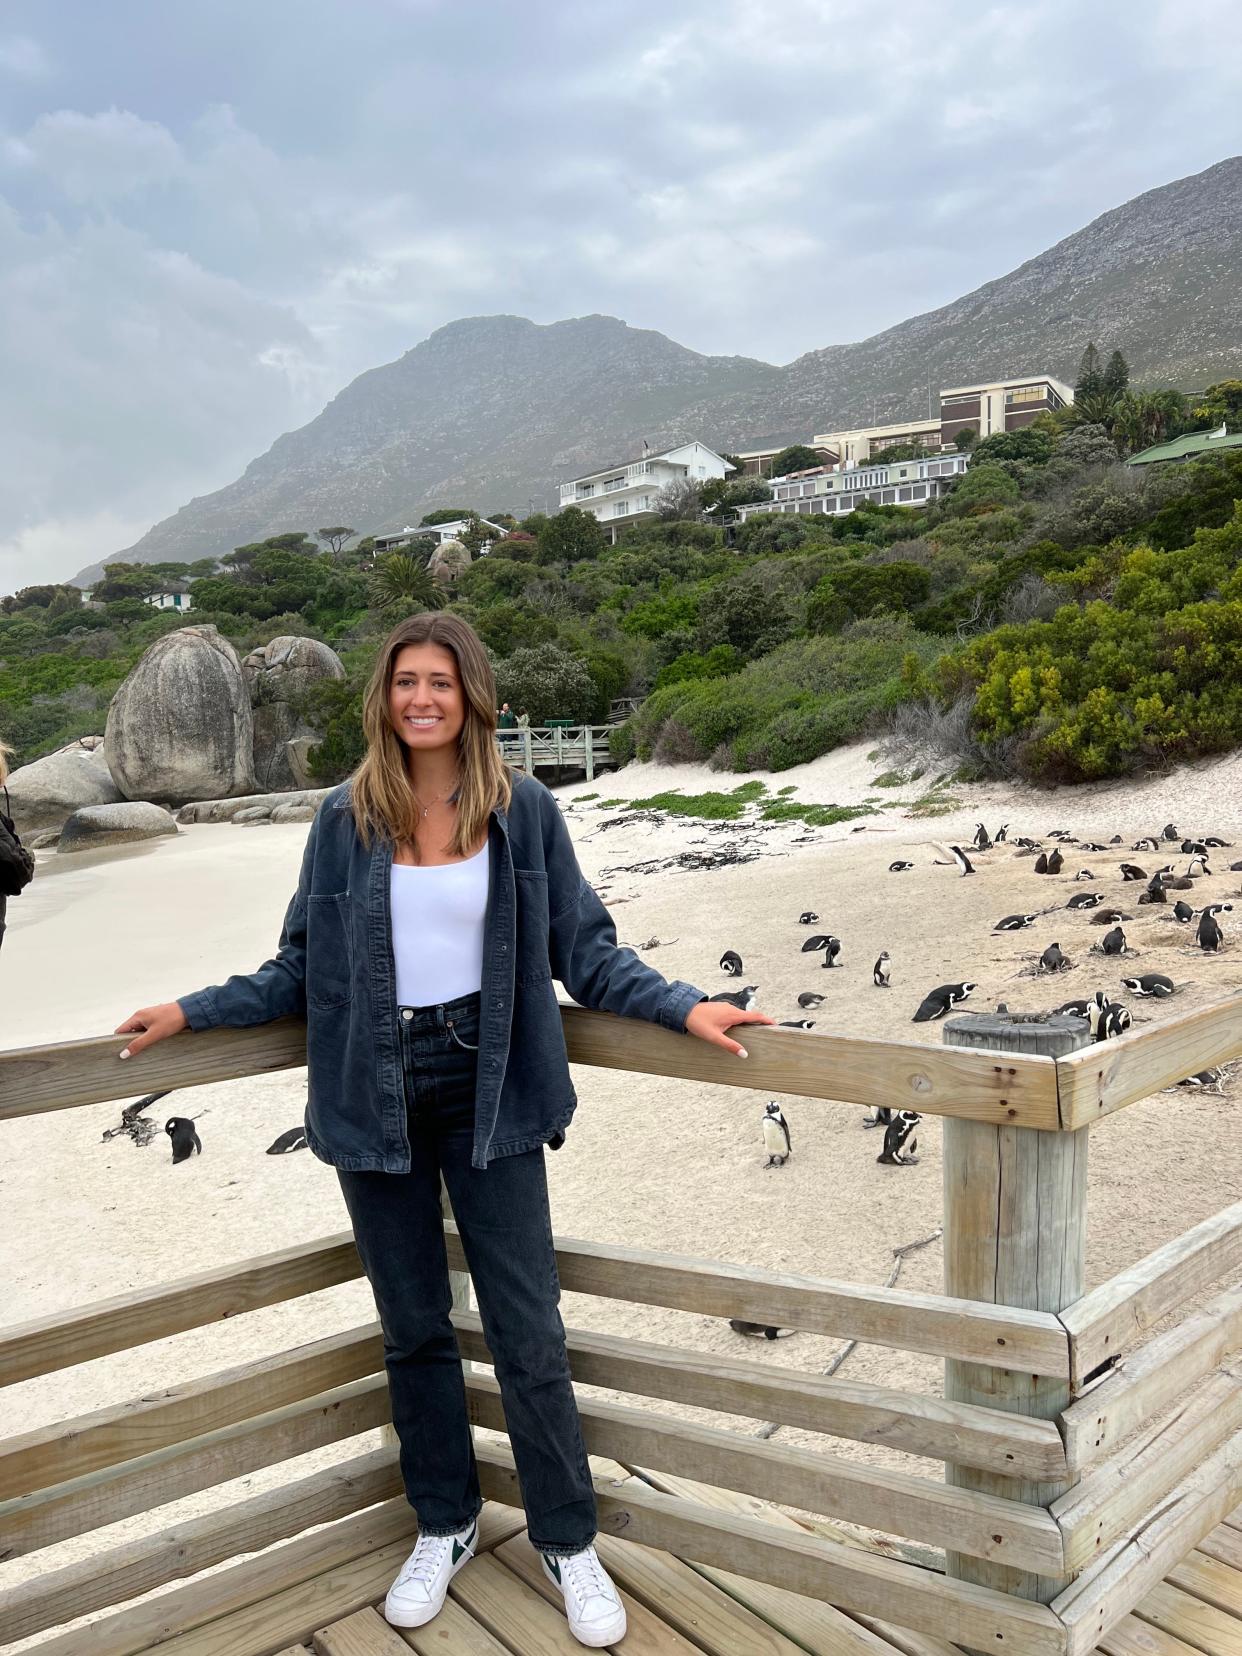 Twenty-two-year-old digital marketer Ashley Storino says she likes to search on TikTok. Only when she knows precisely what she’s looking for does she turn to Google first.